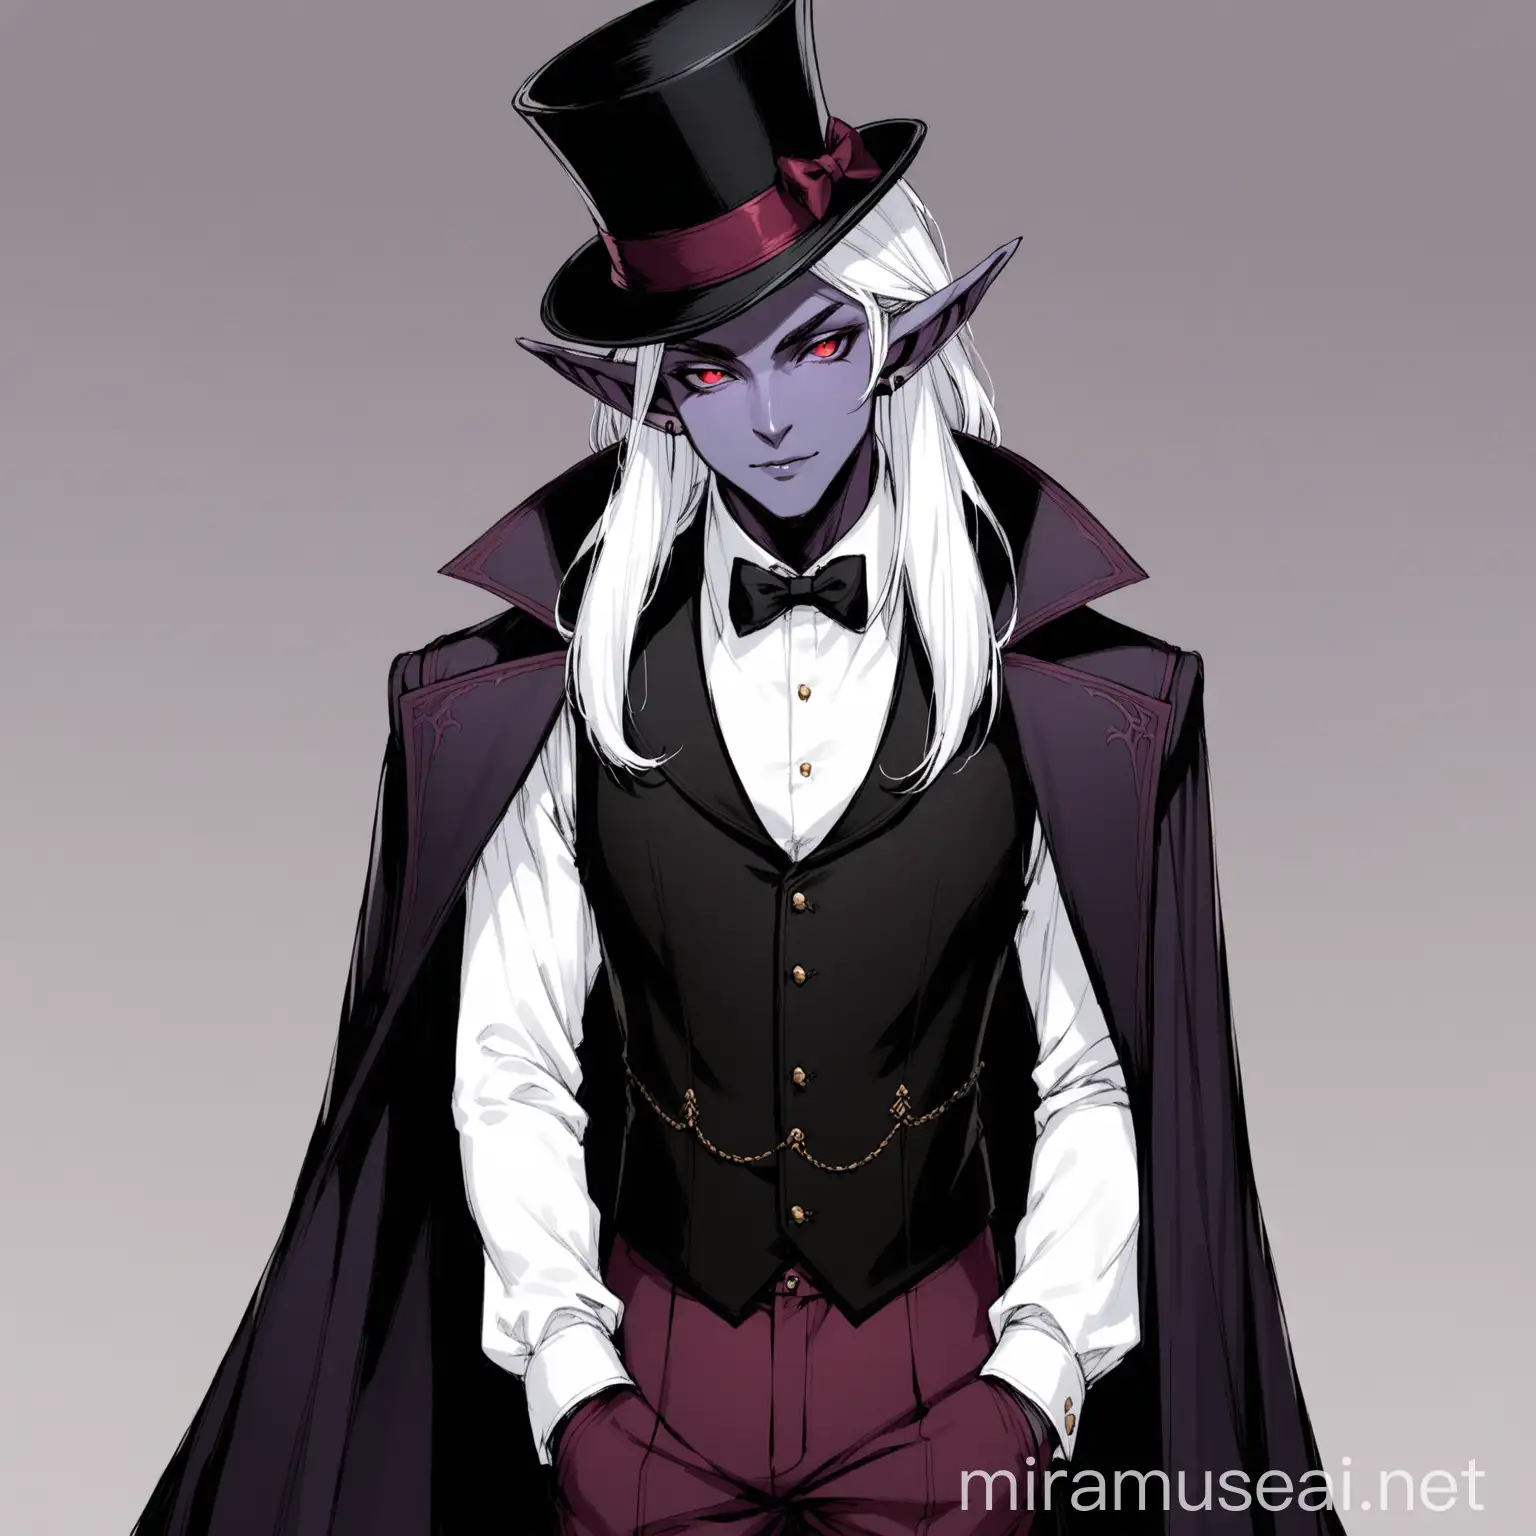 An adult male, a dark elf drow with pale purple skin, dressed in a black overcoat with a vest, a white shirt, with classic burgundy trousers. He has long white hair and red eyes. He wears a top hat on his head.